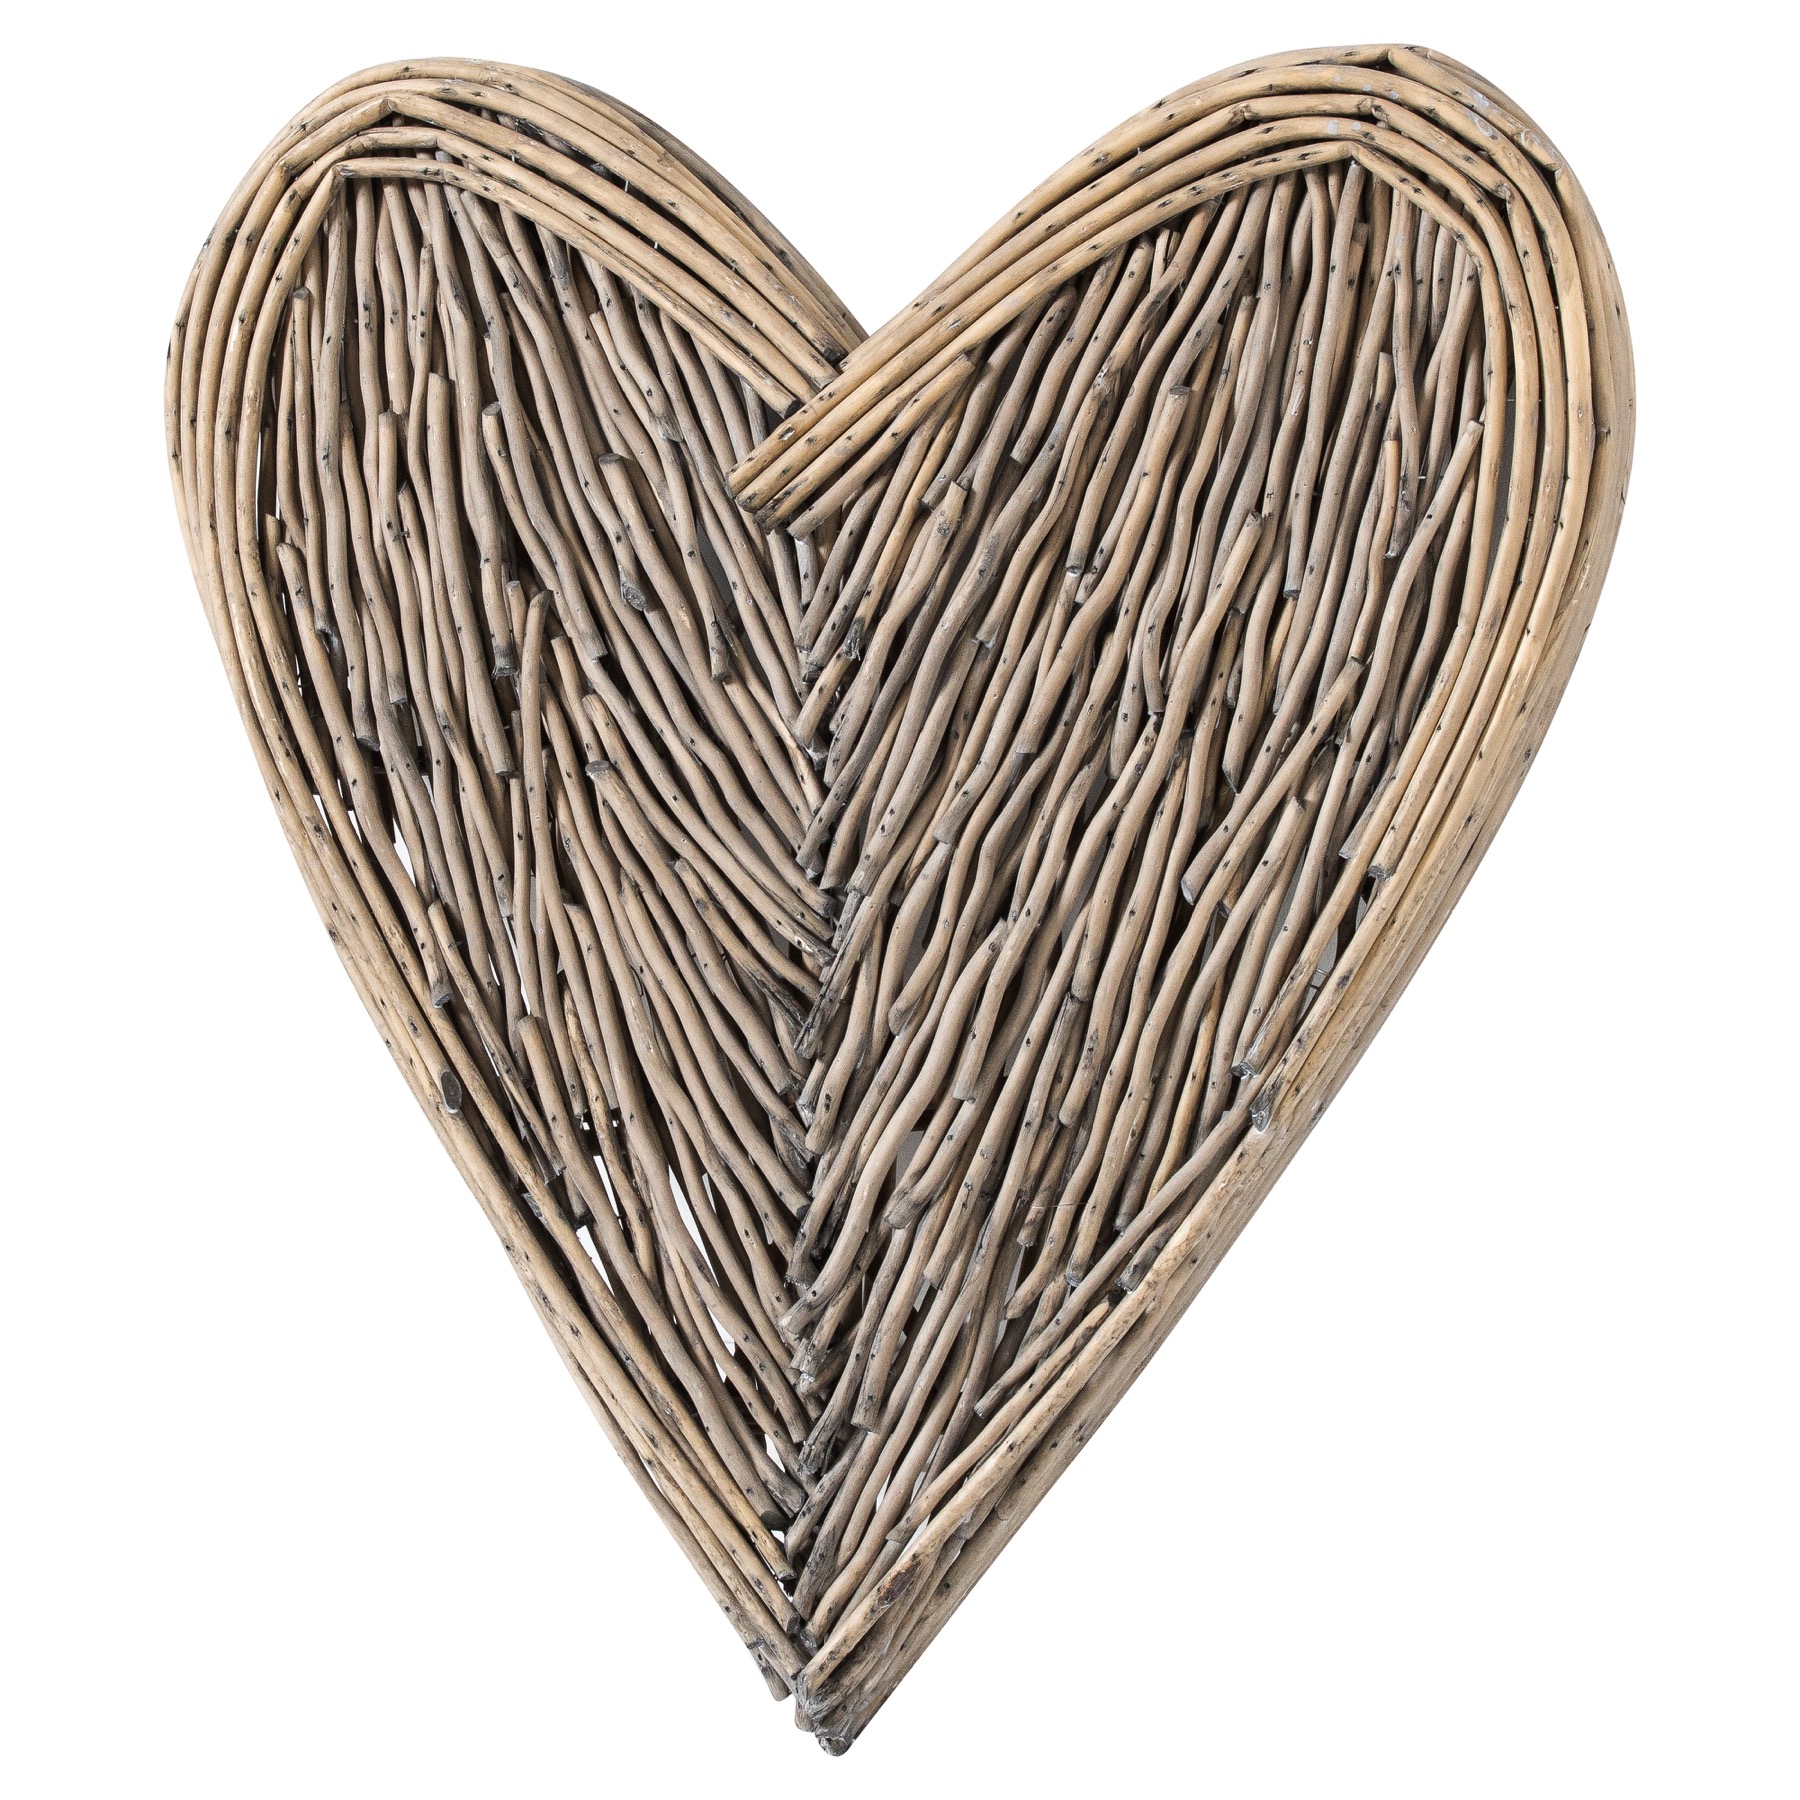 Small Willow Branch Heart - Image 1